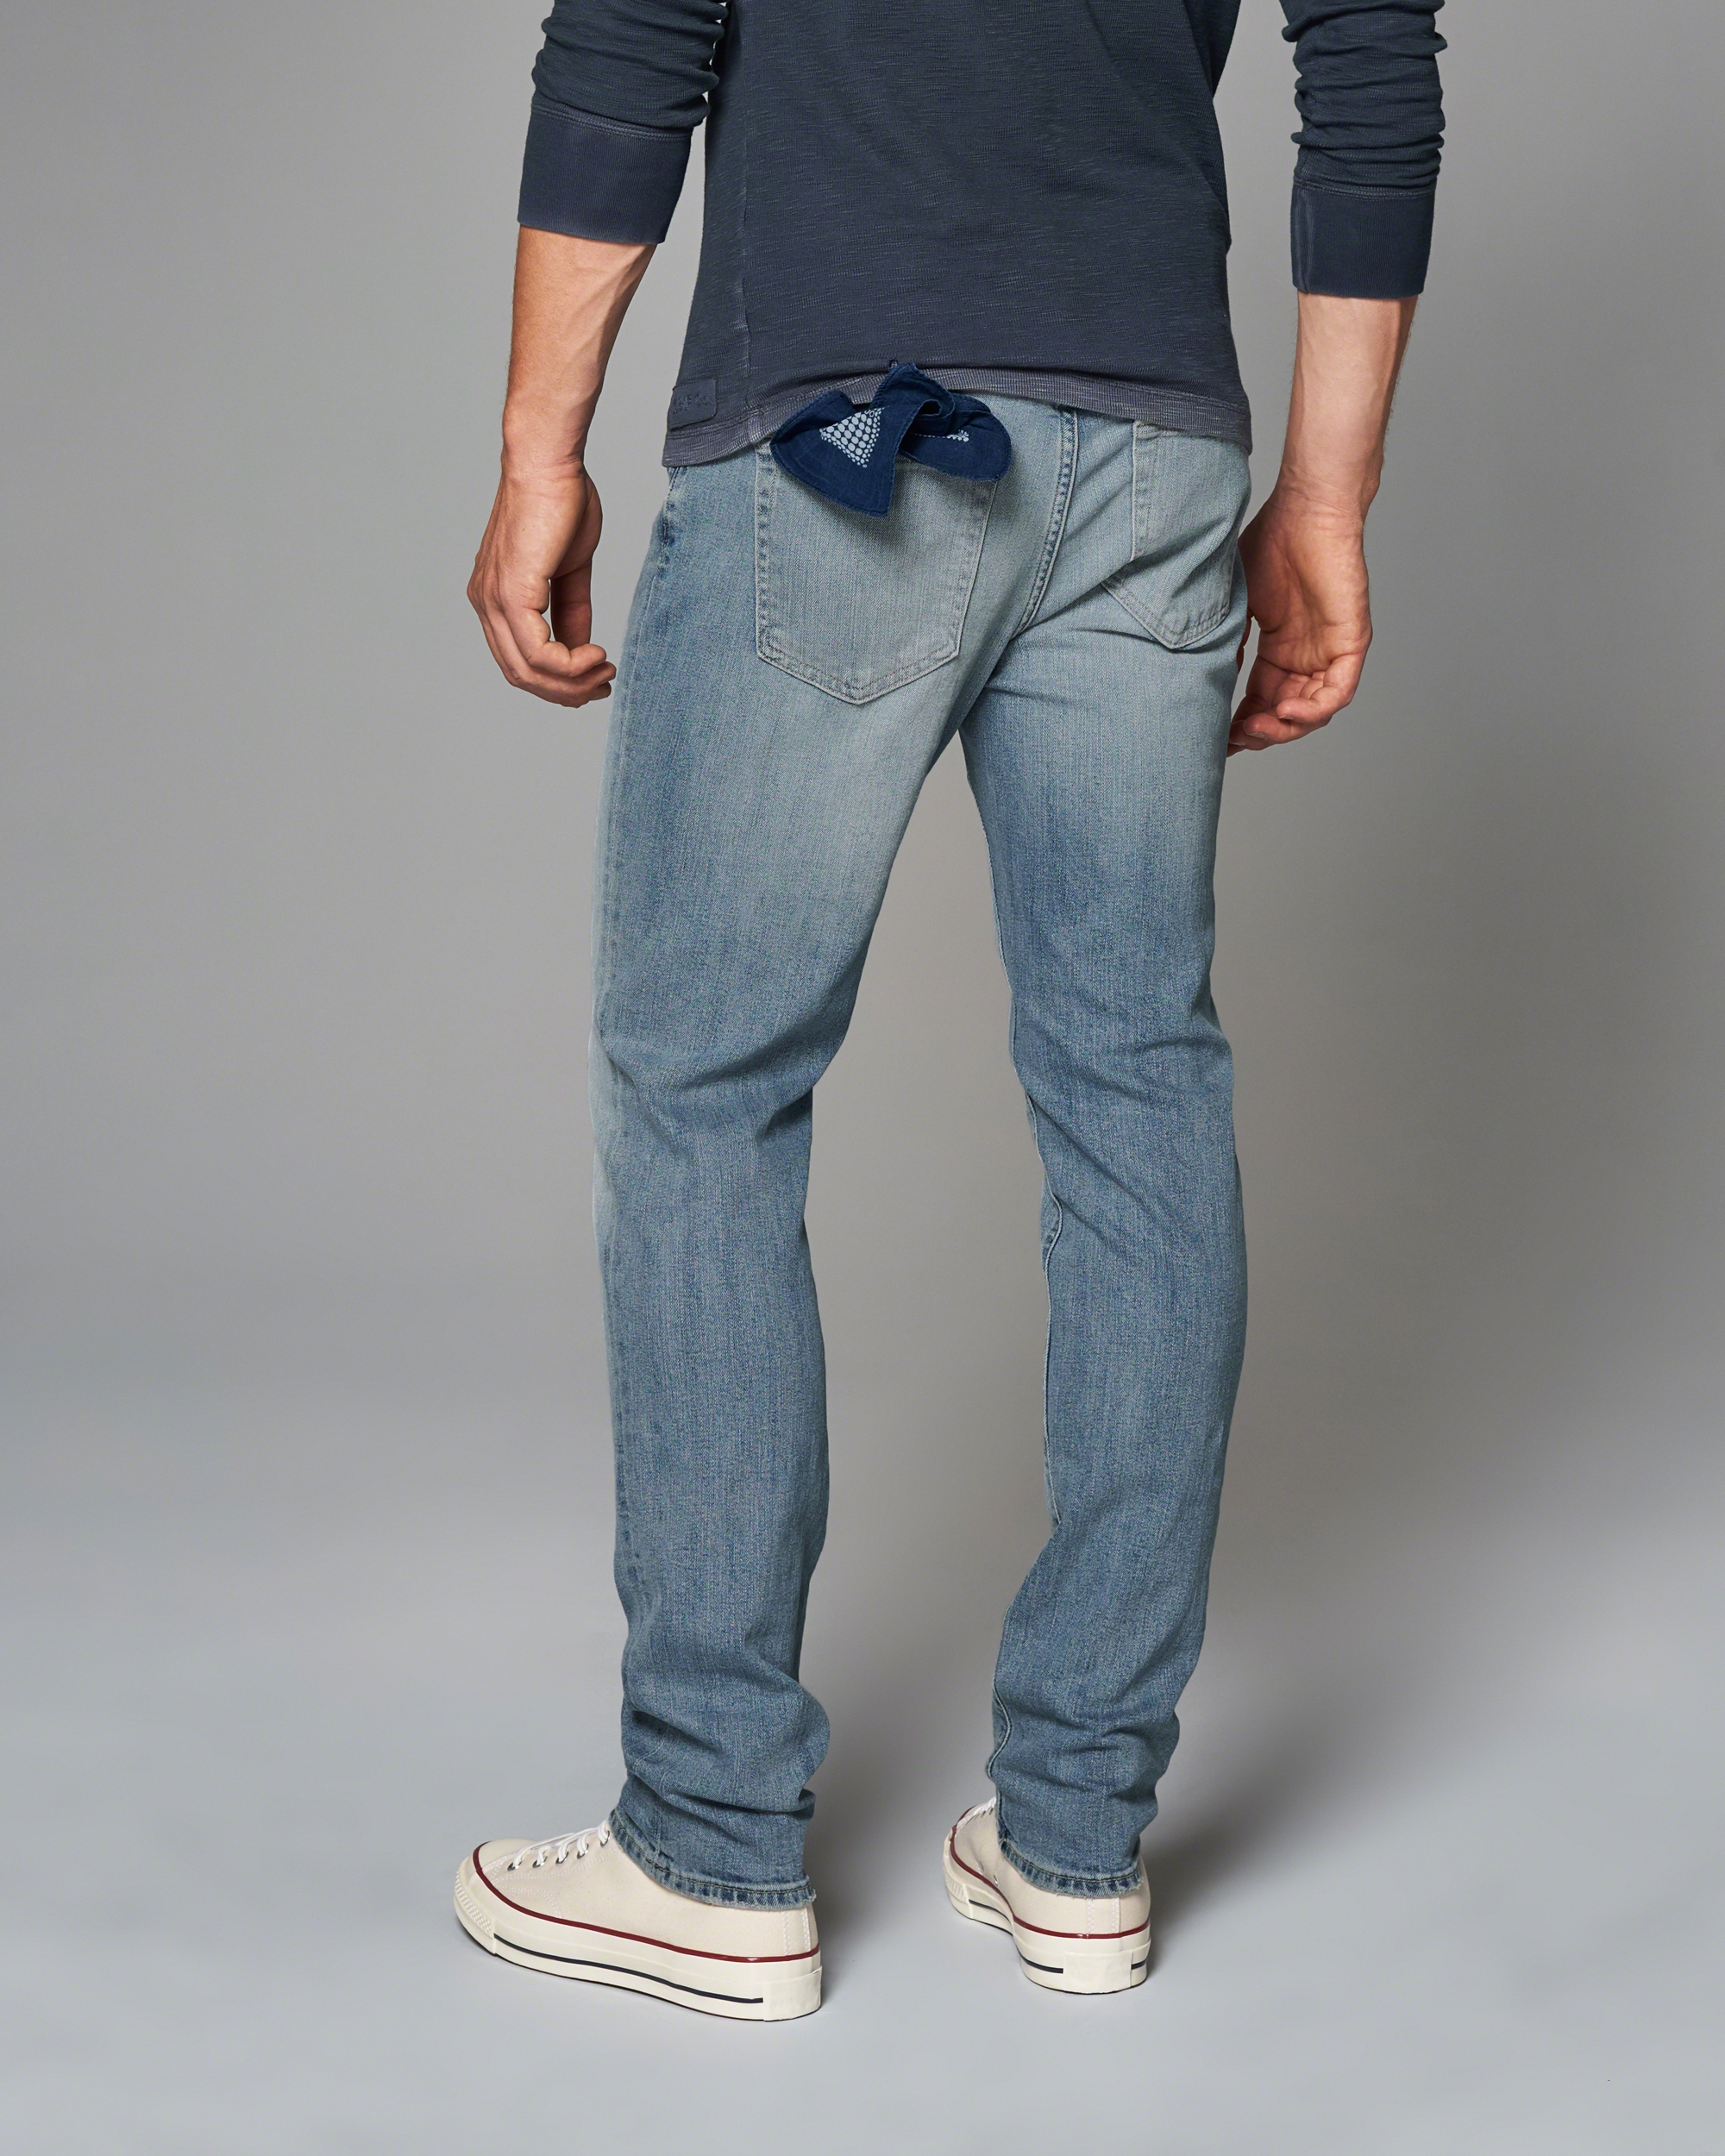 Lyst Abercrombie And Fitch Athletic Skinny Jeans In Blue For Men